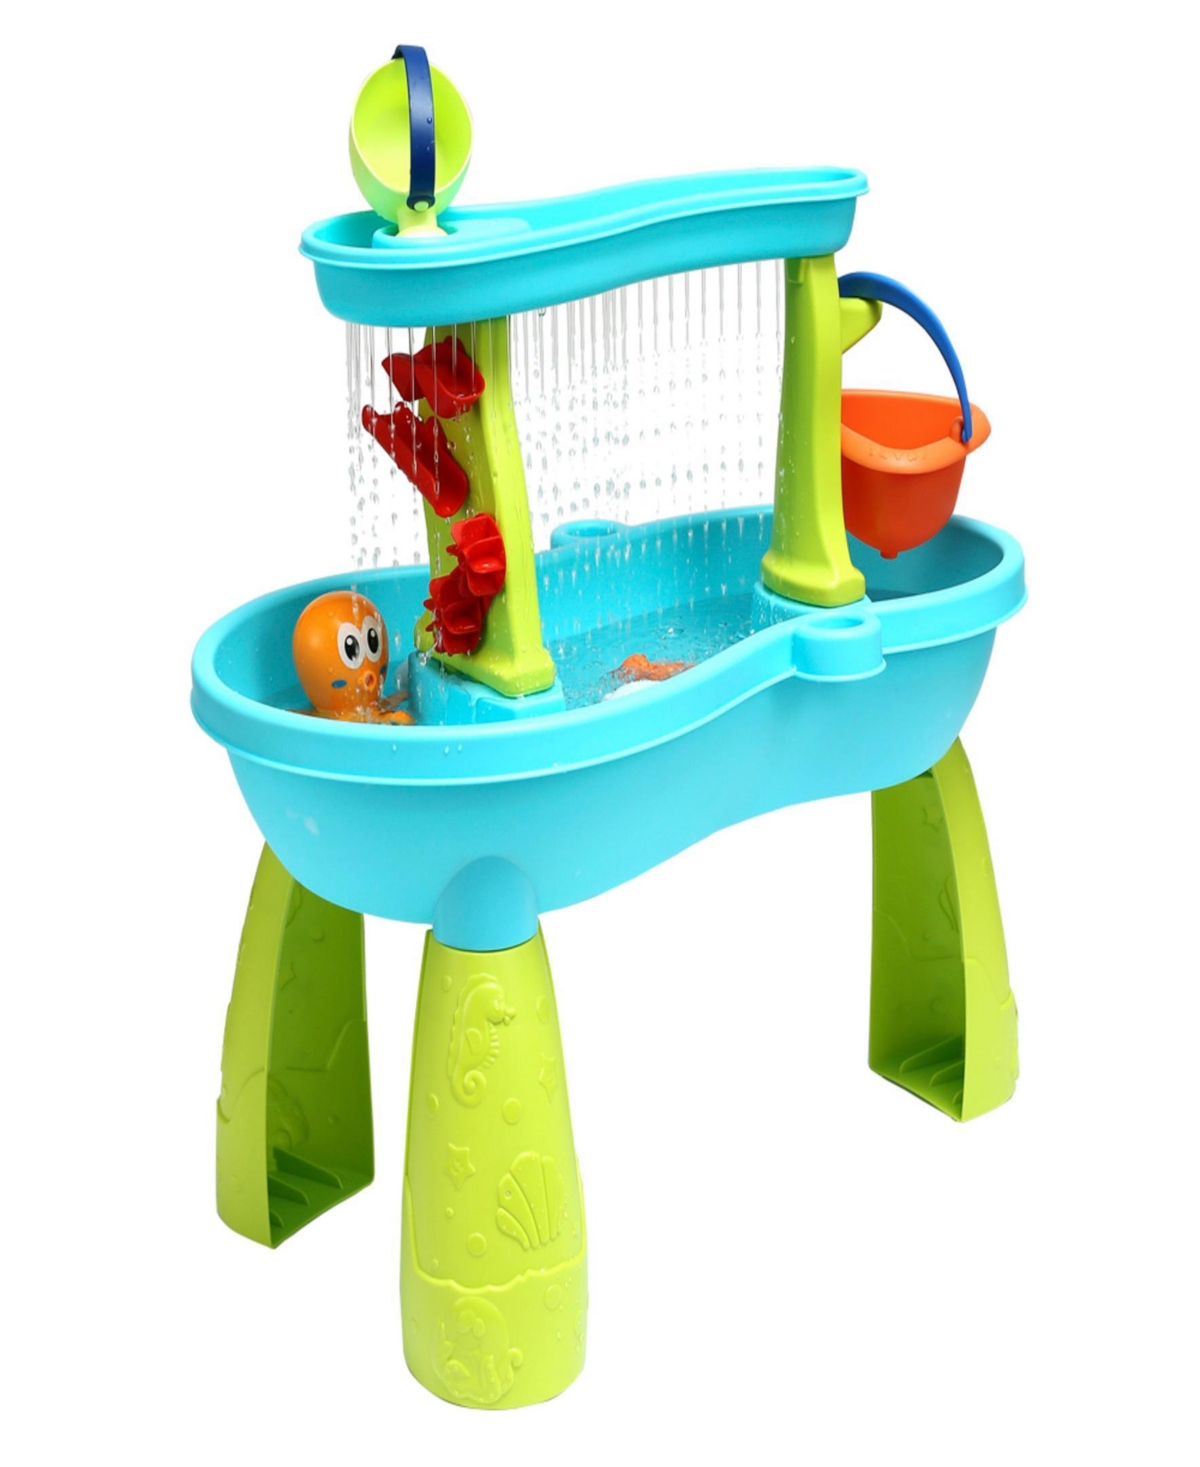 Trimate Toddler Sensory Sand And Water 2 Tier Table In Multi